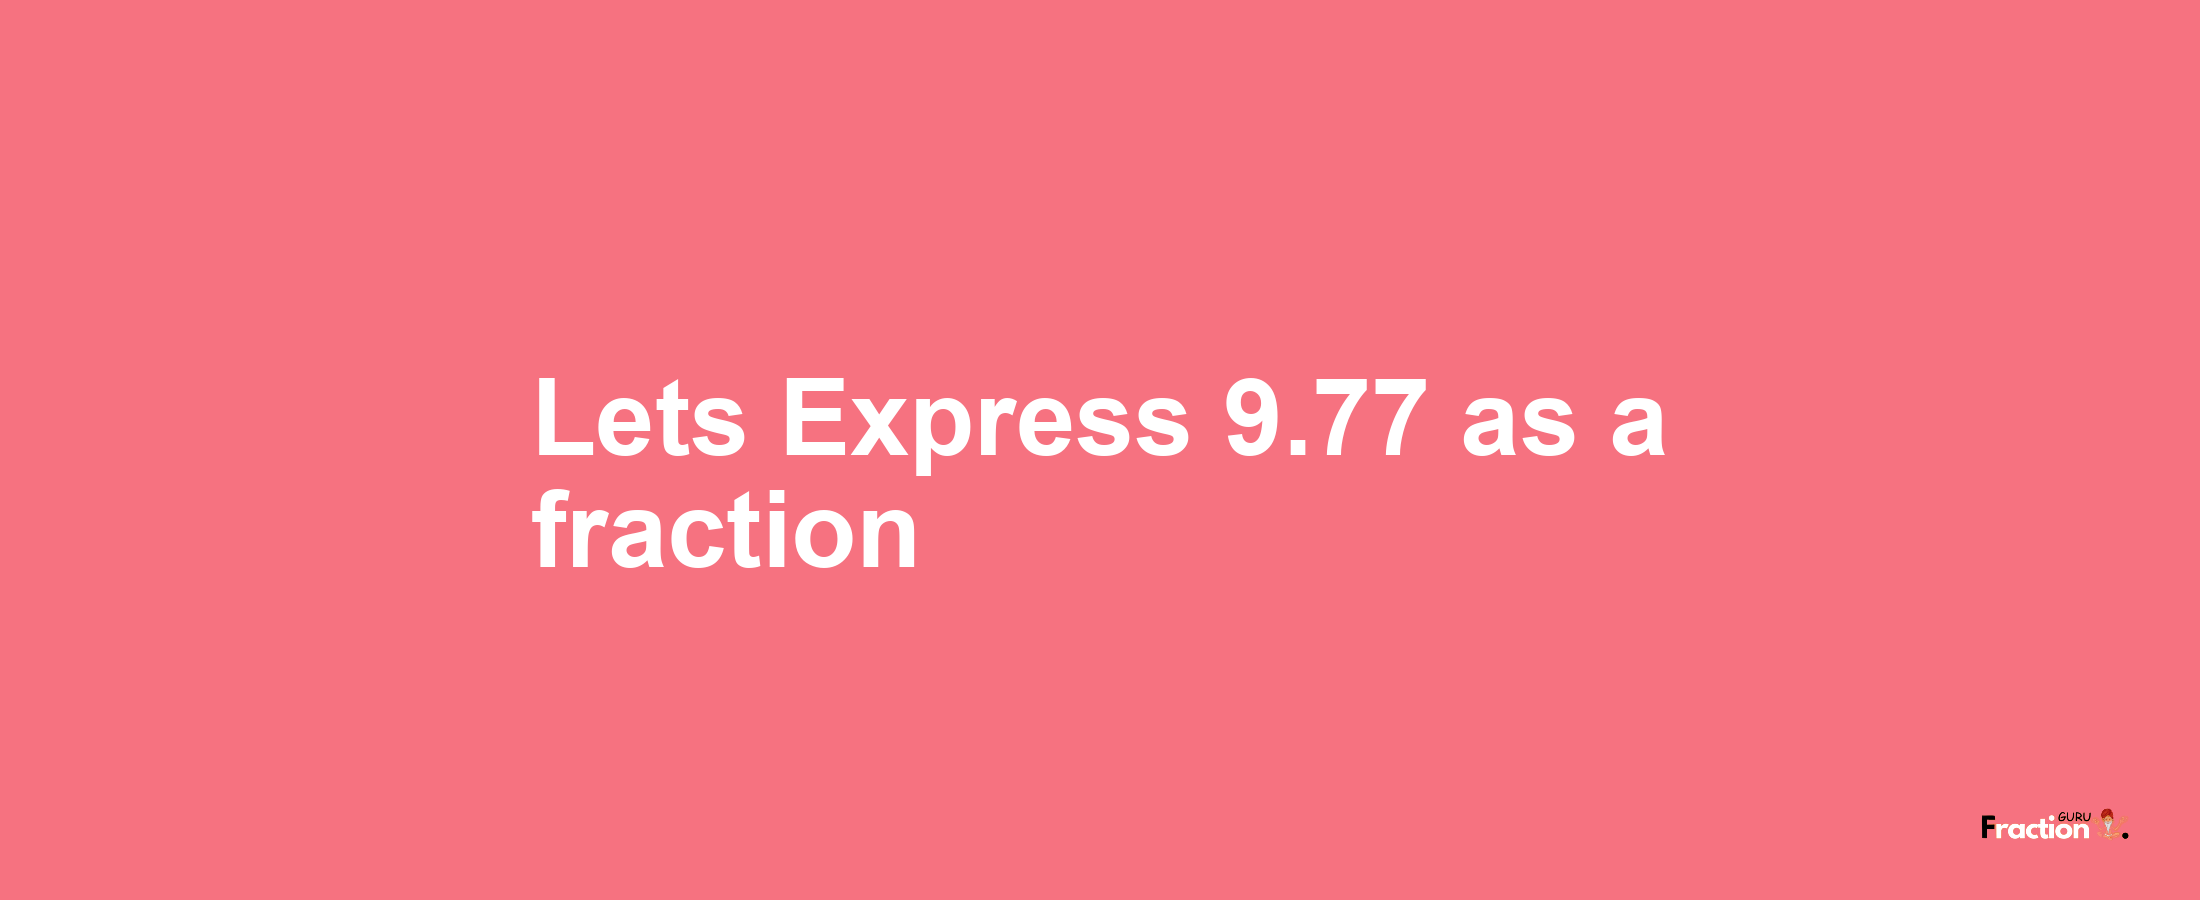 Lets Express 9.77 as afraction